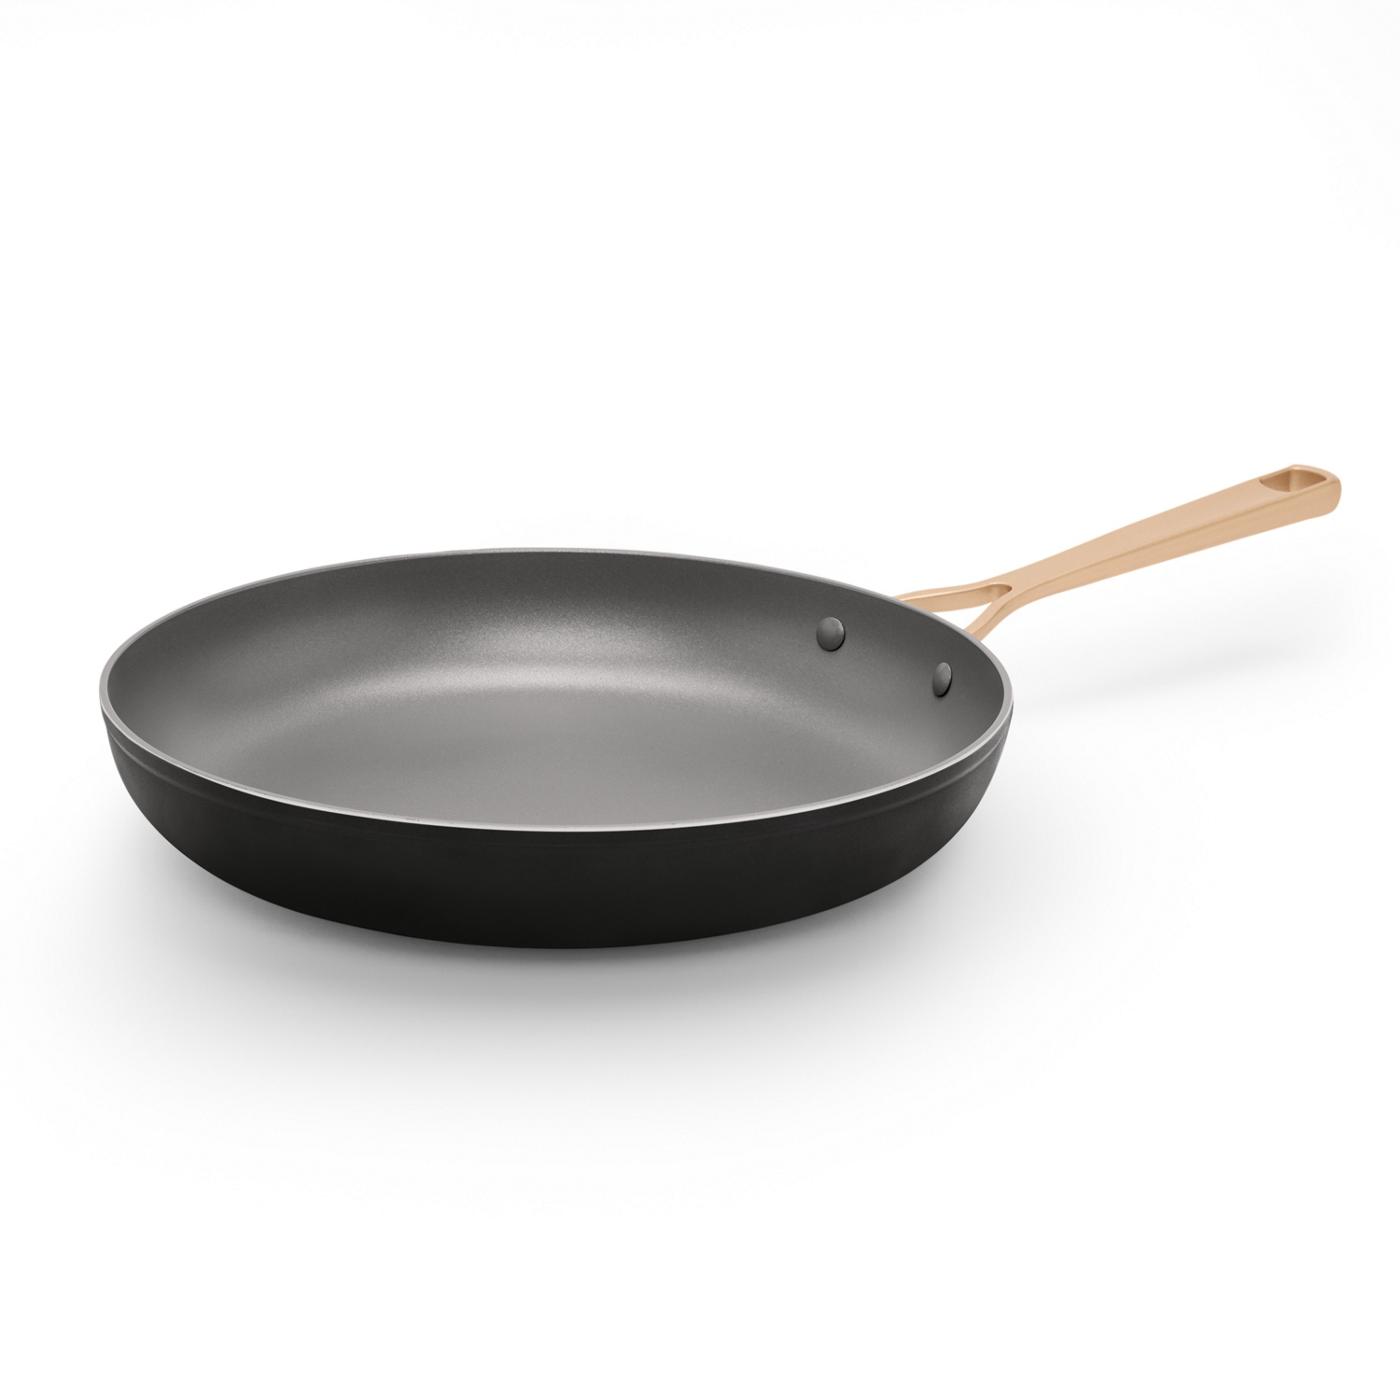 Kitchen & Table by H-E-B Non-Stick Fry Pan - Classic Black; image 1 of 3